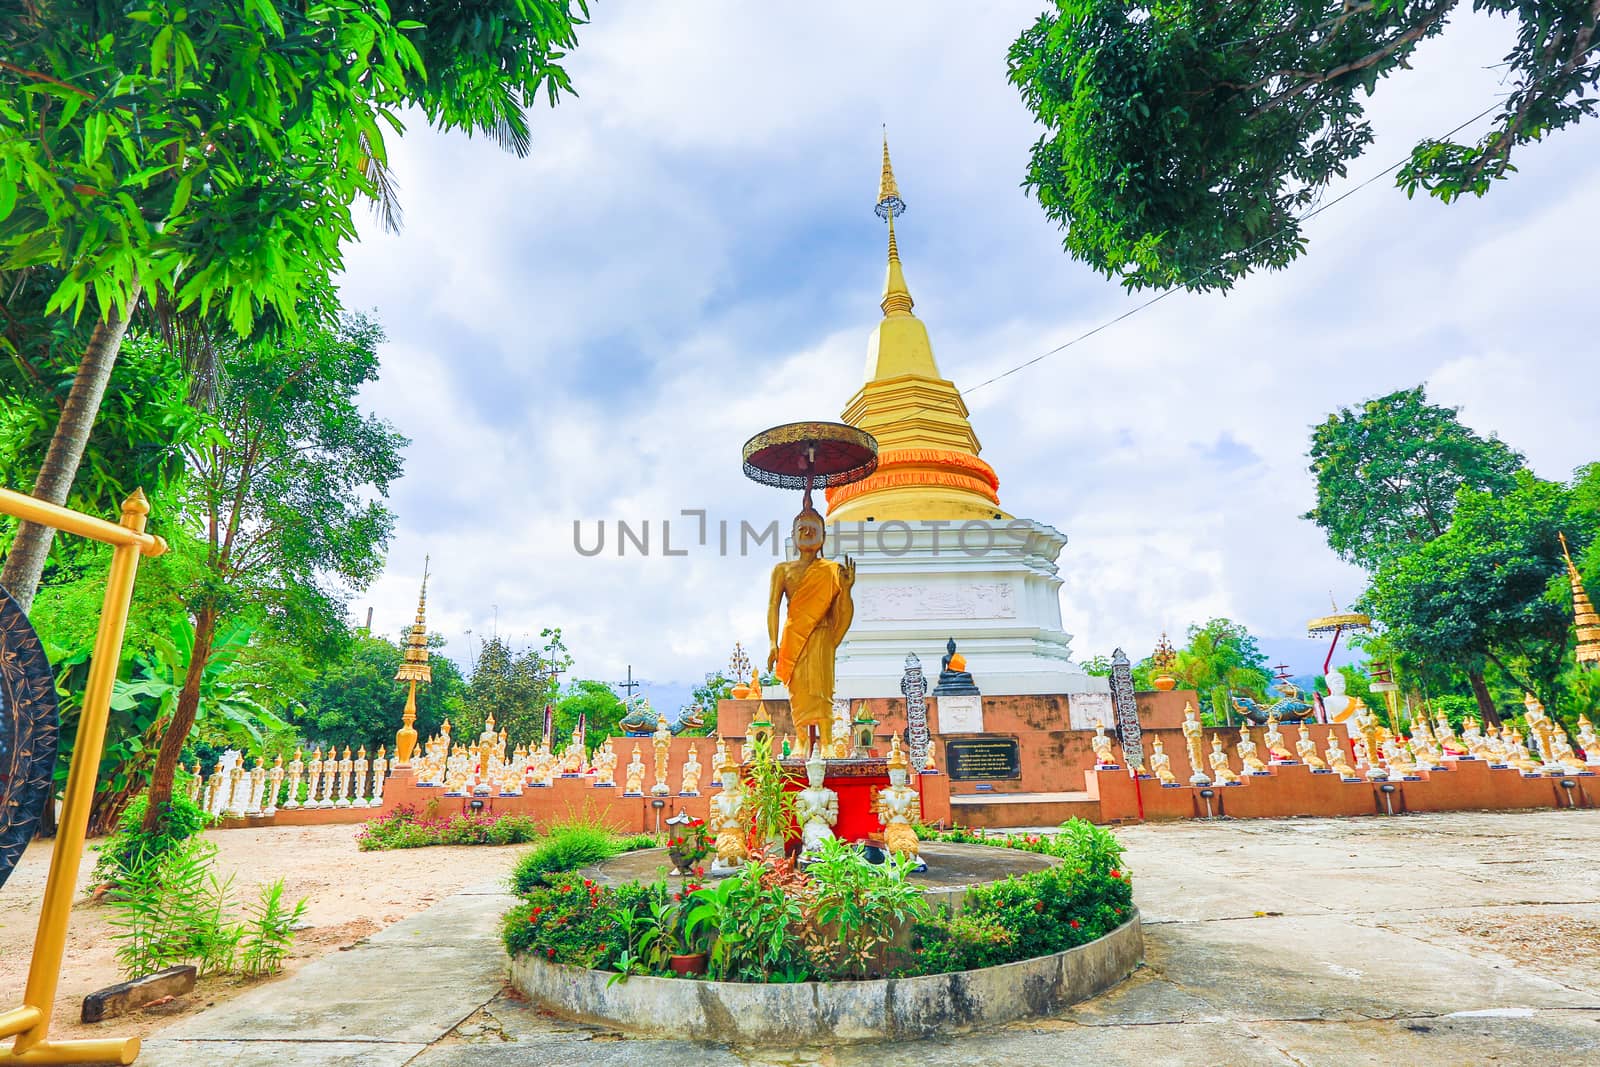 Phra That Chedi Chiang Mai in northern Thailand.